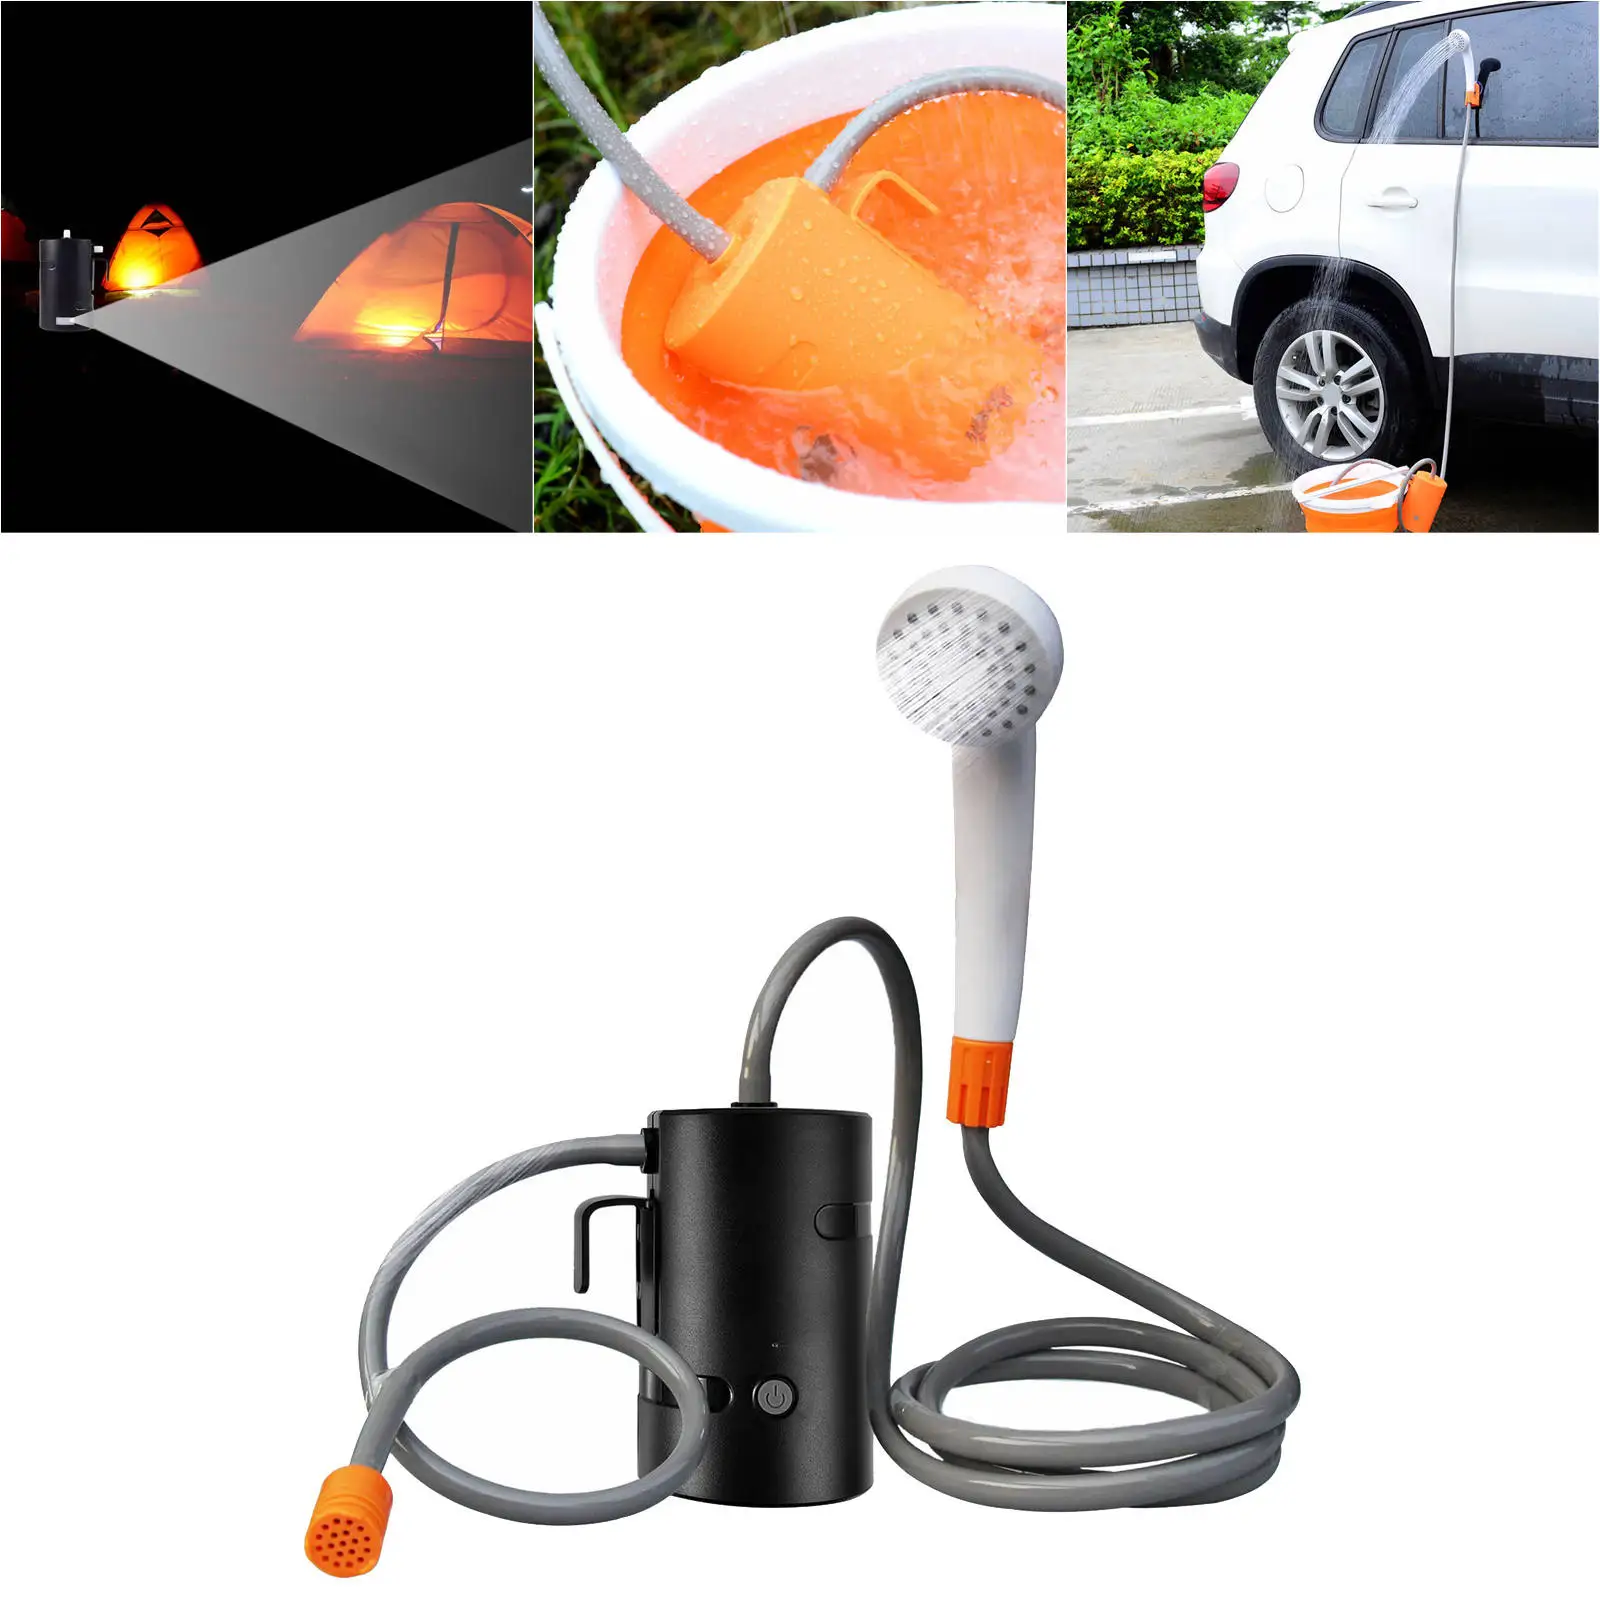 

Portable Electric Shower Outdoor Camping Bathing Portable Showers Head Pet Shower Car Washer With Hose Bathe Tool Travel Caravan